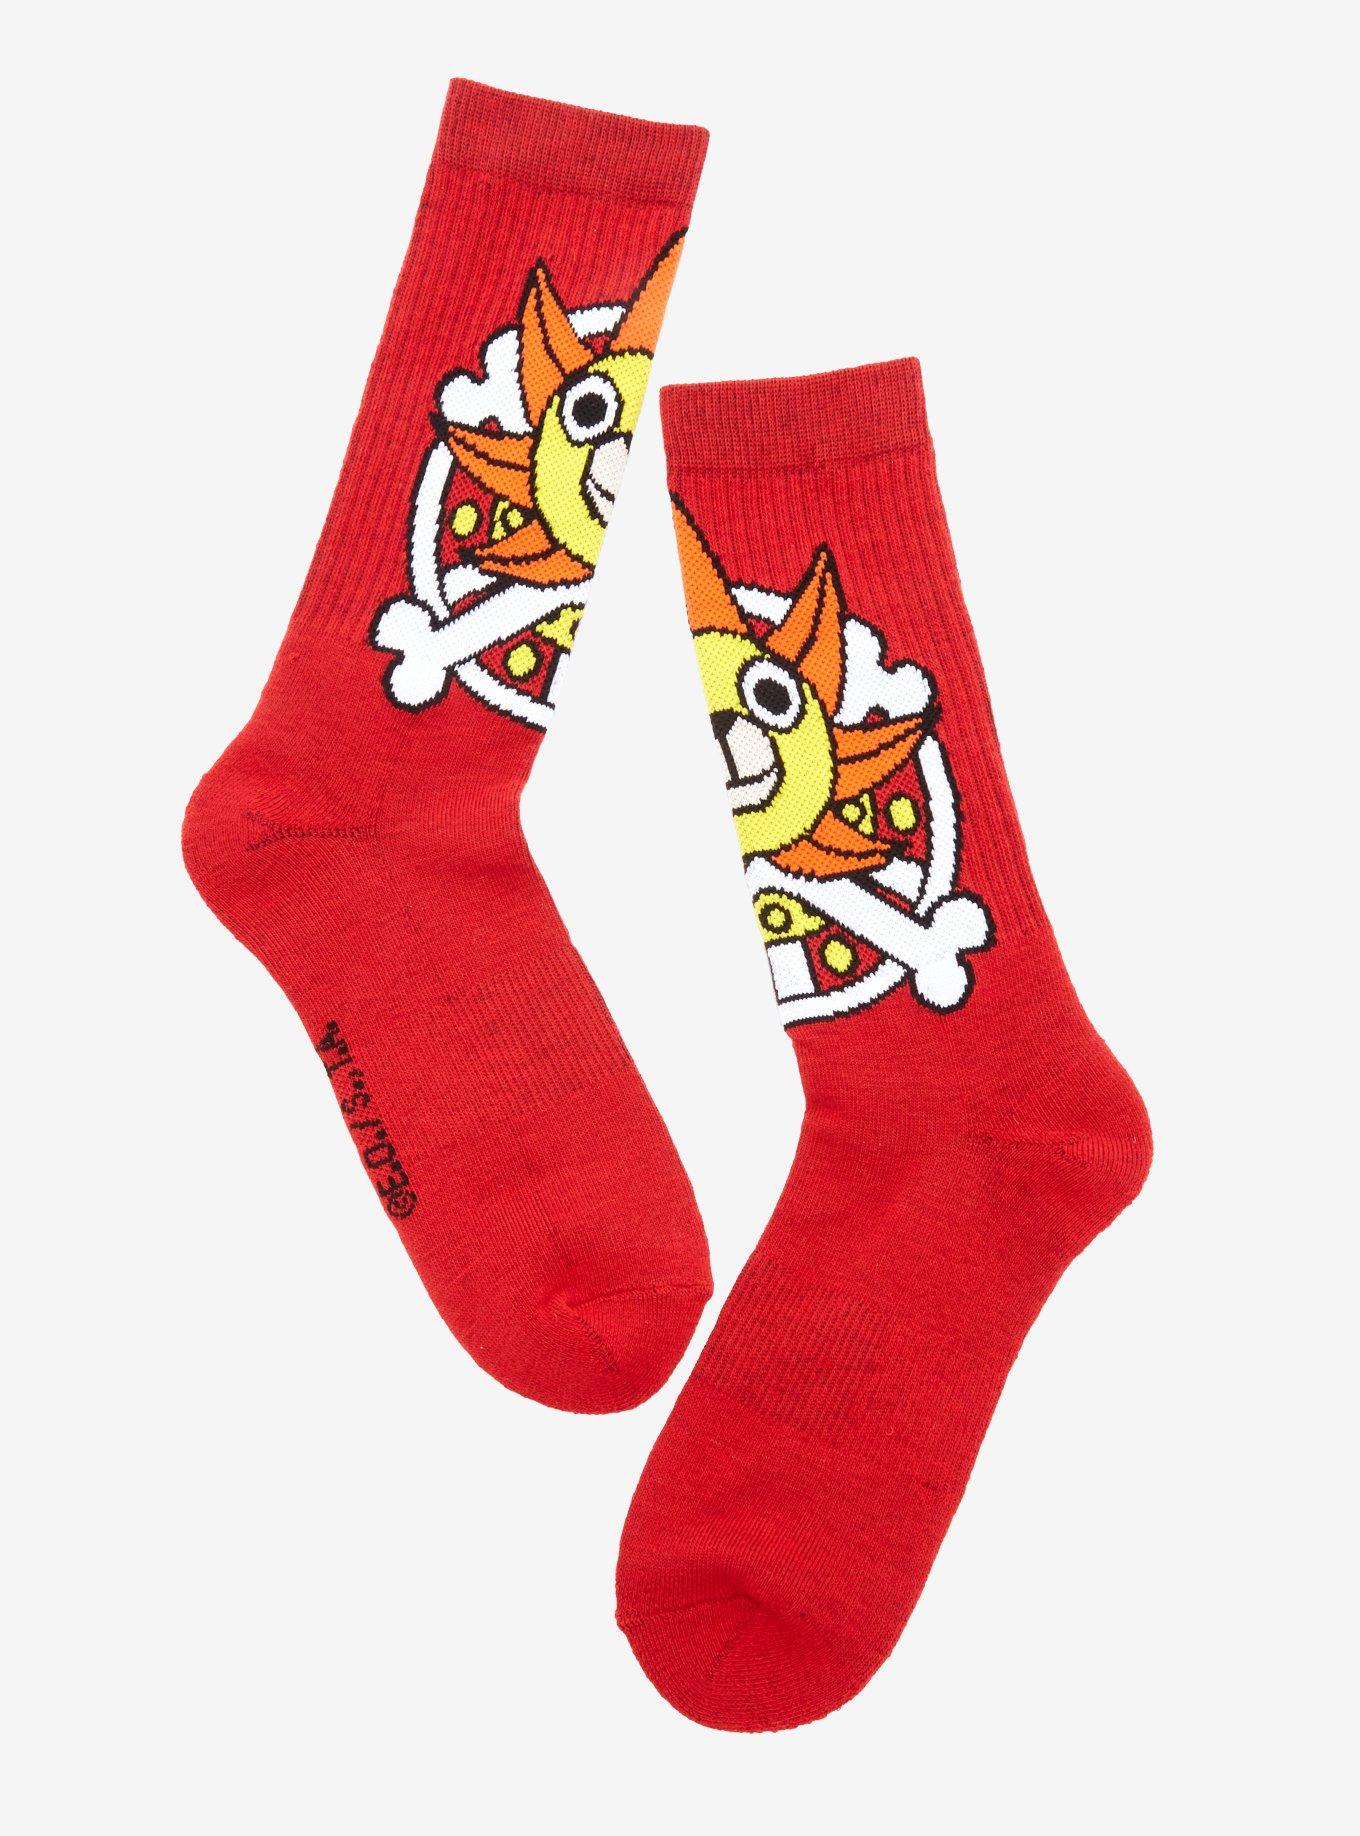 One Piece Thousand Sunny Crew Socks - BoxLunch Exclusive